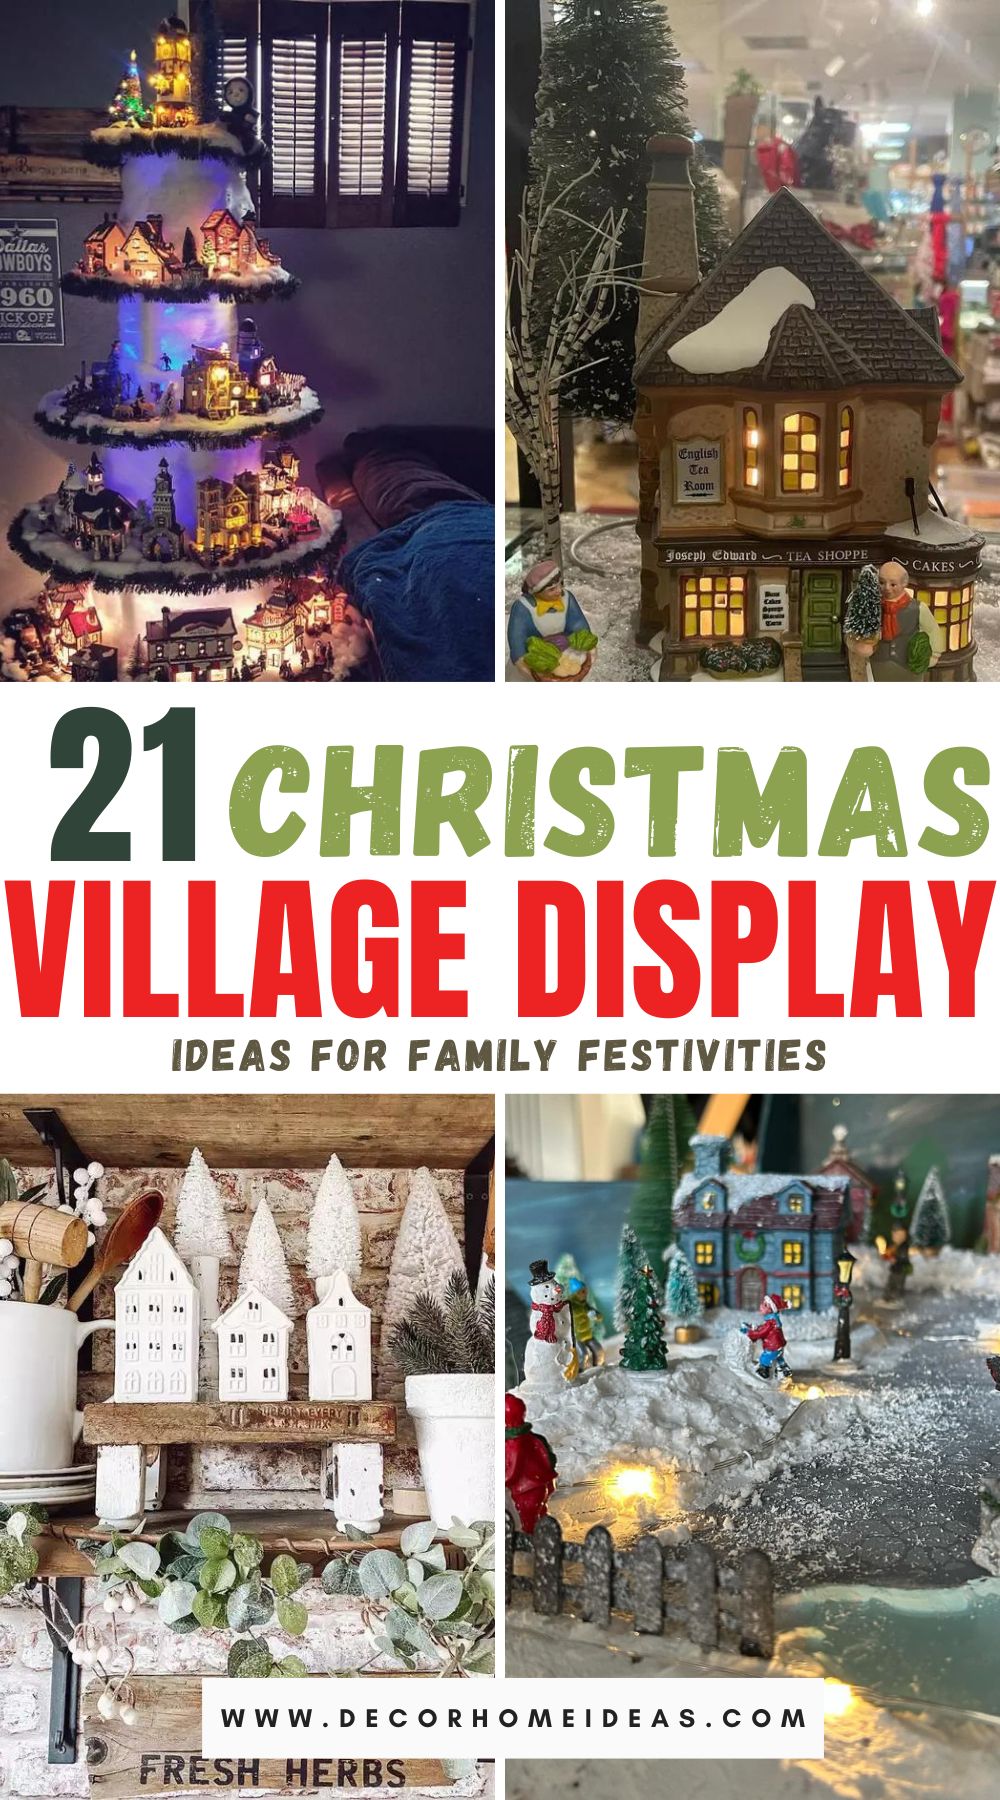 Elevate your festive décor with 22 enchanting Christmas village display ideas that promise to captivate your family's holiday spirit. Explore imaginative setups and bring the magic of the season to your home.